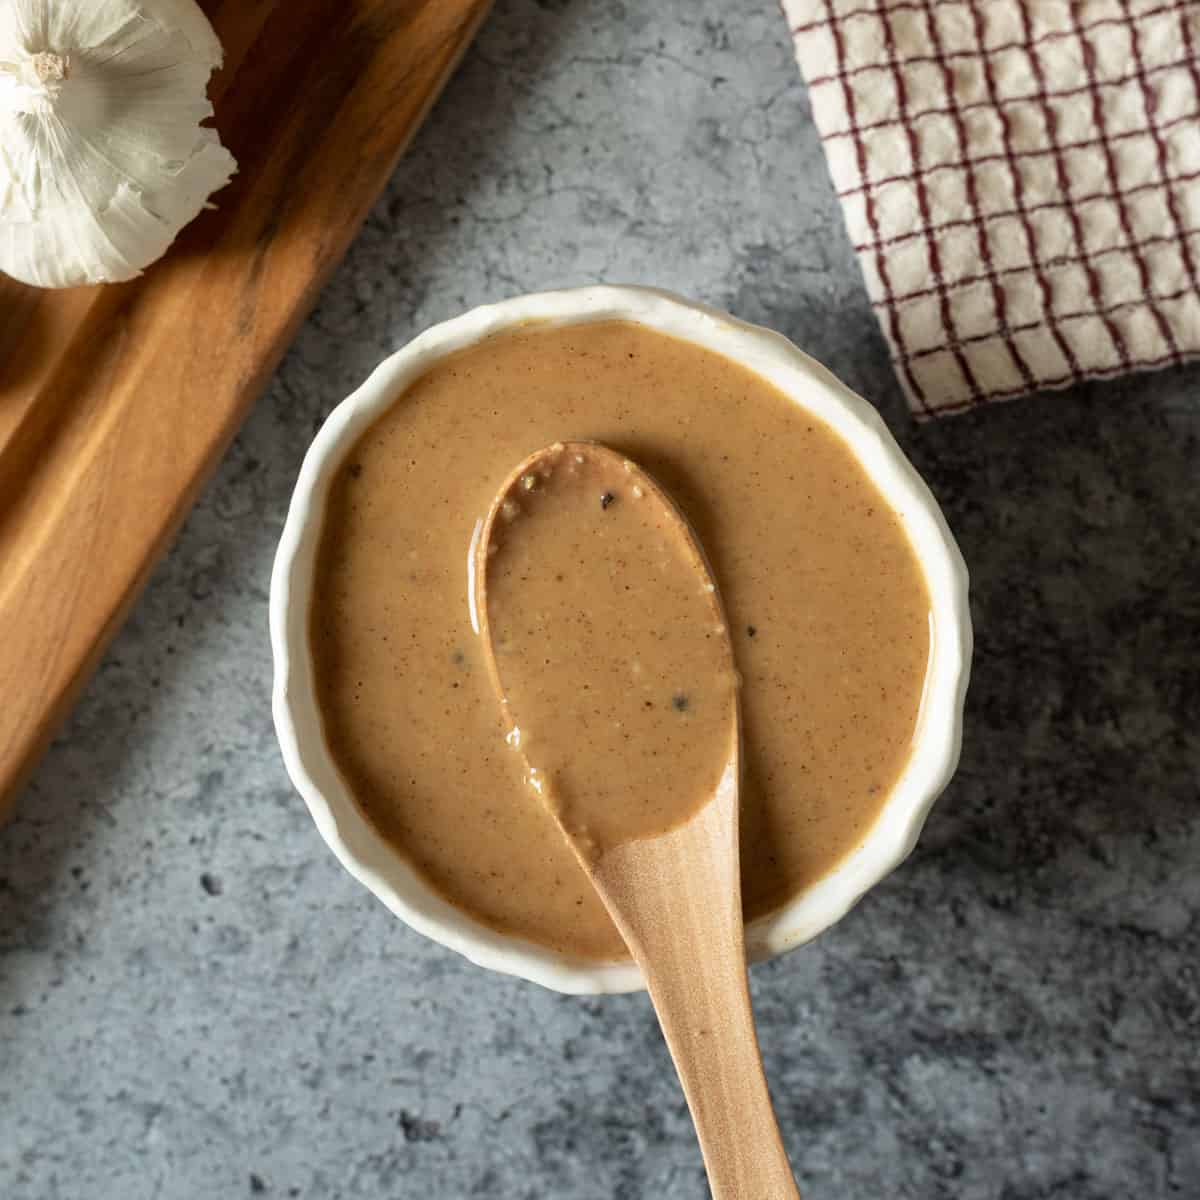 miso dressing and sauce in a small white bowl.